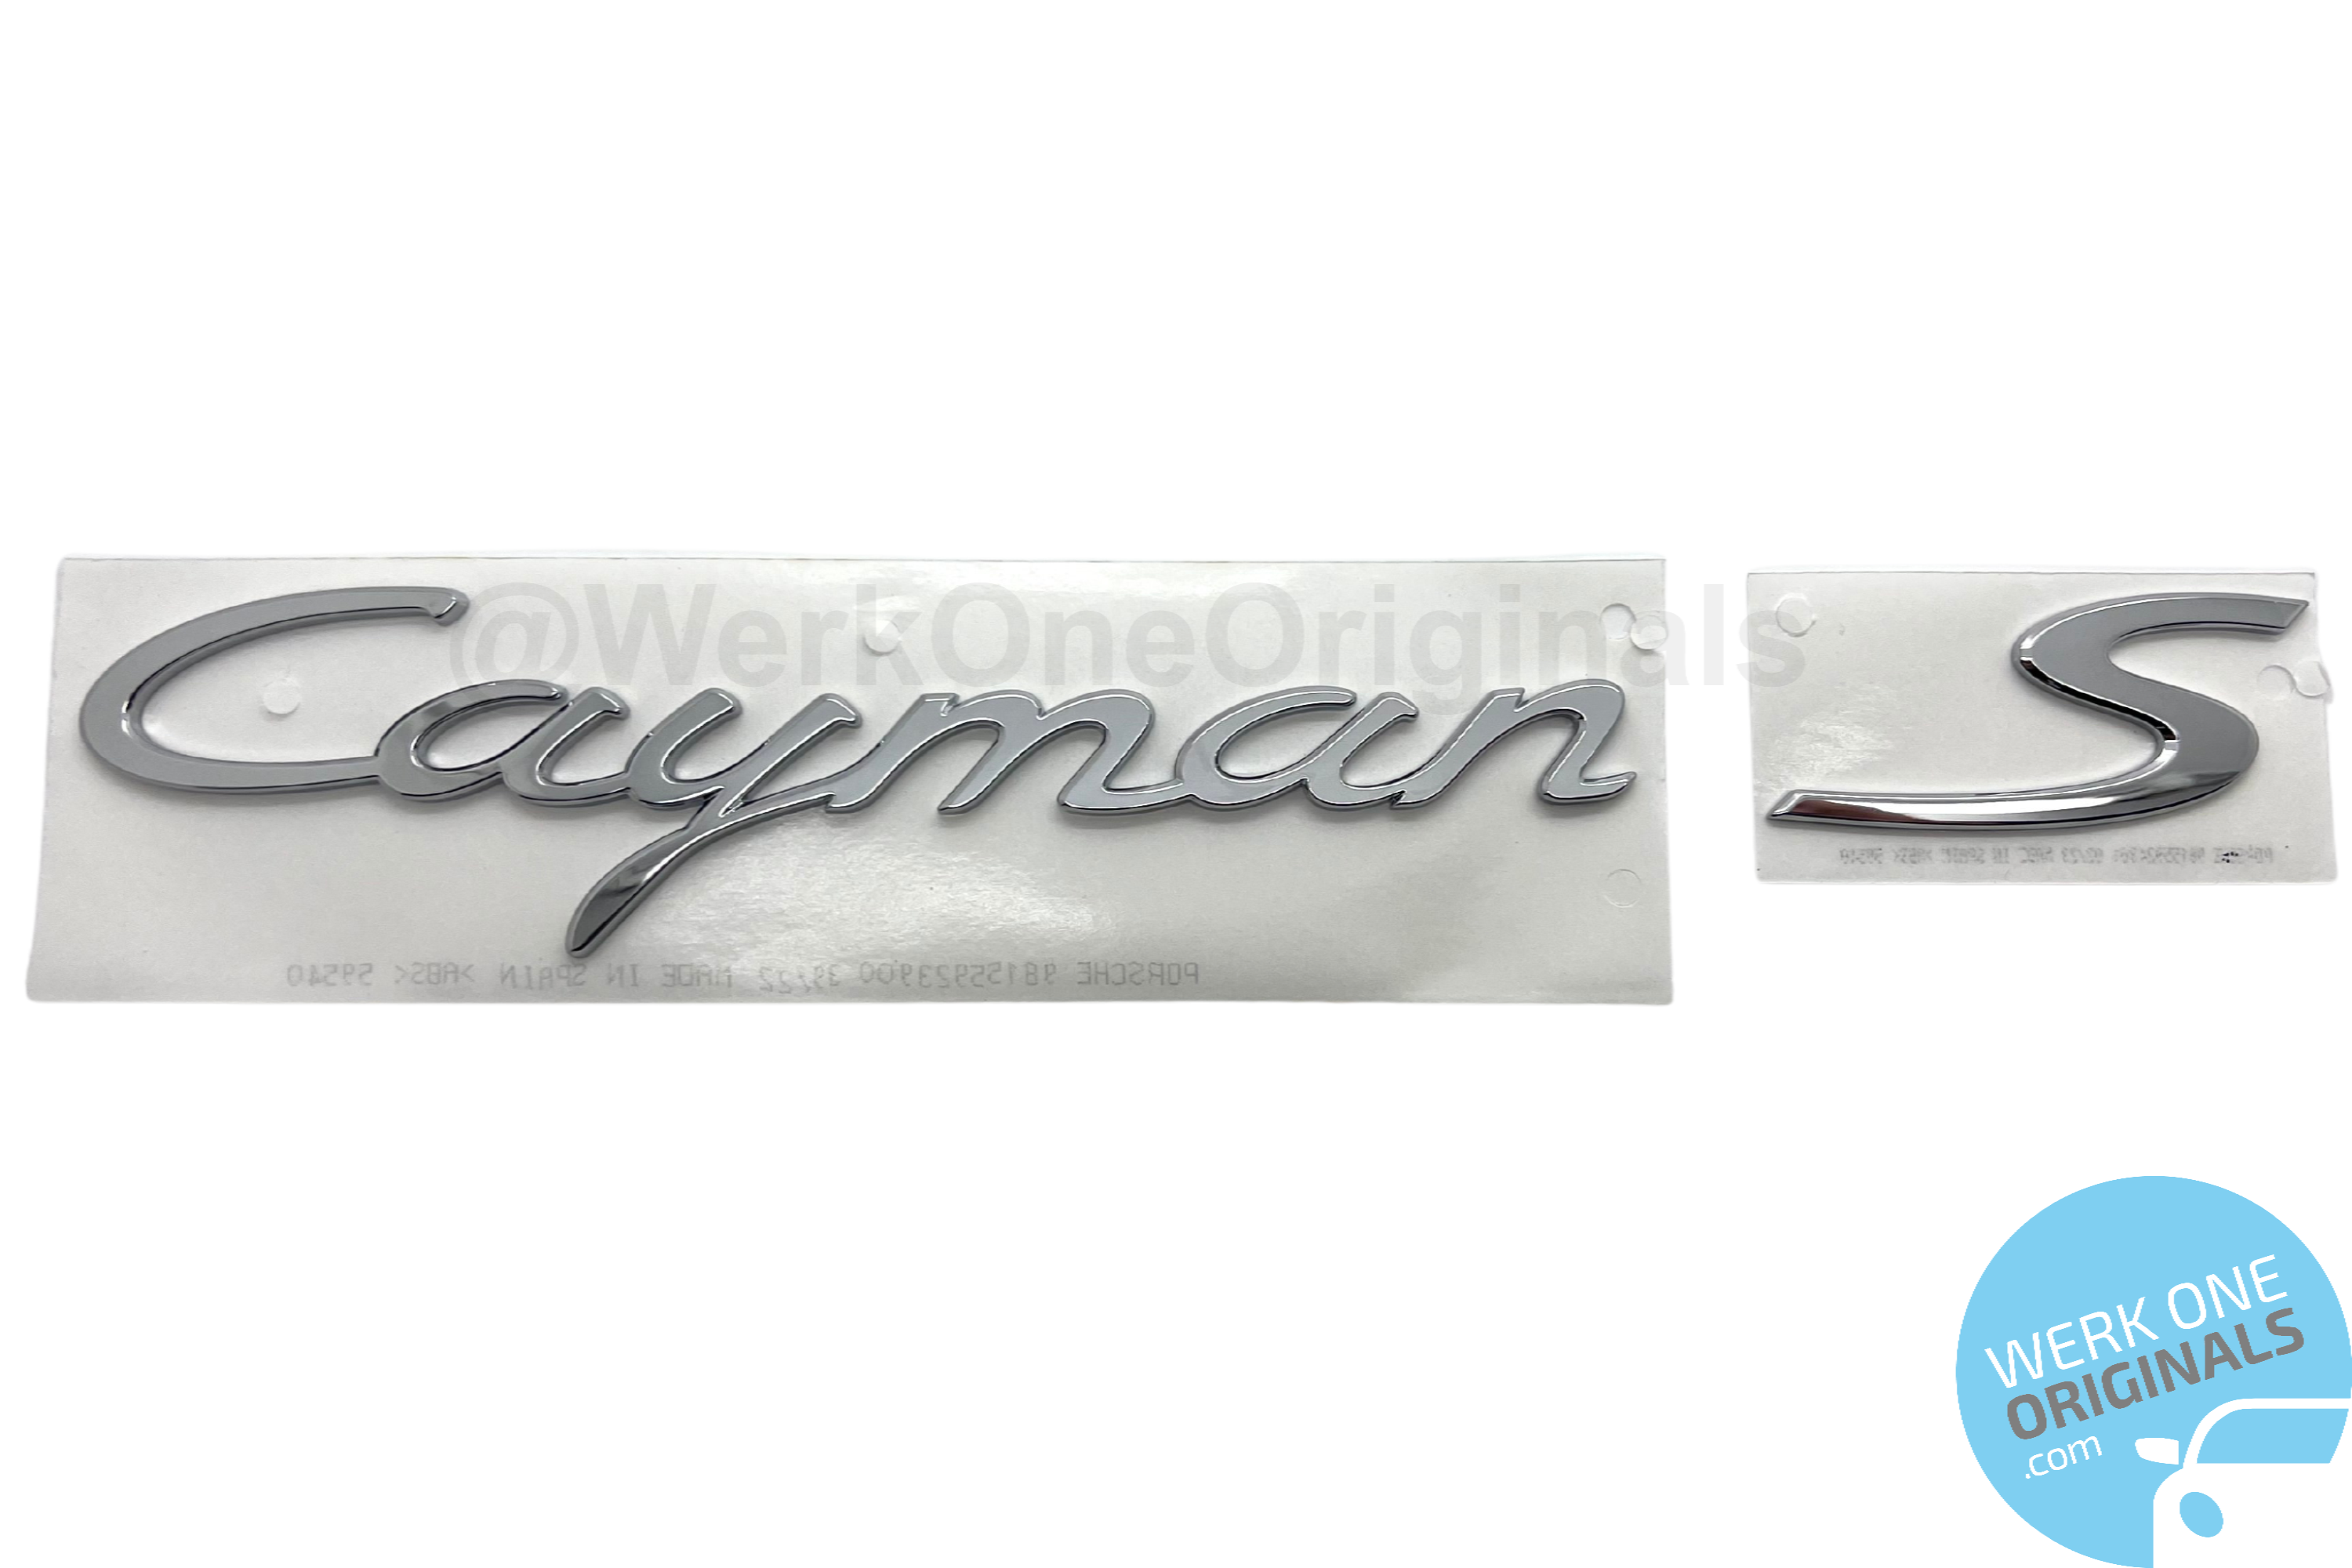 Porsche Official 'Cayman S' Rear Badge Decal in Chrome Silver for Cayman S Type 981 Models